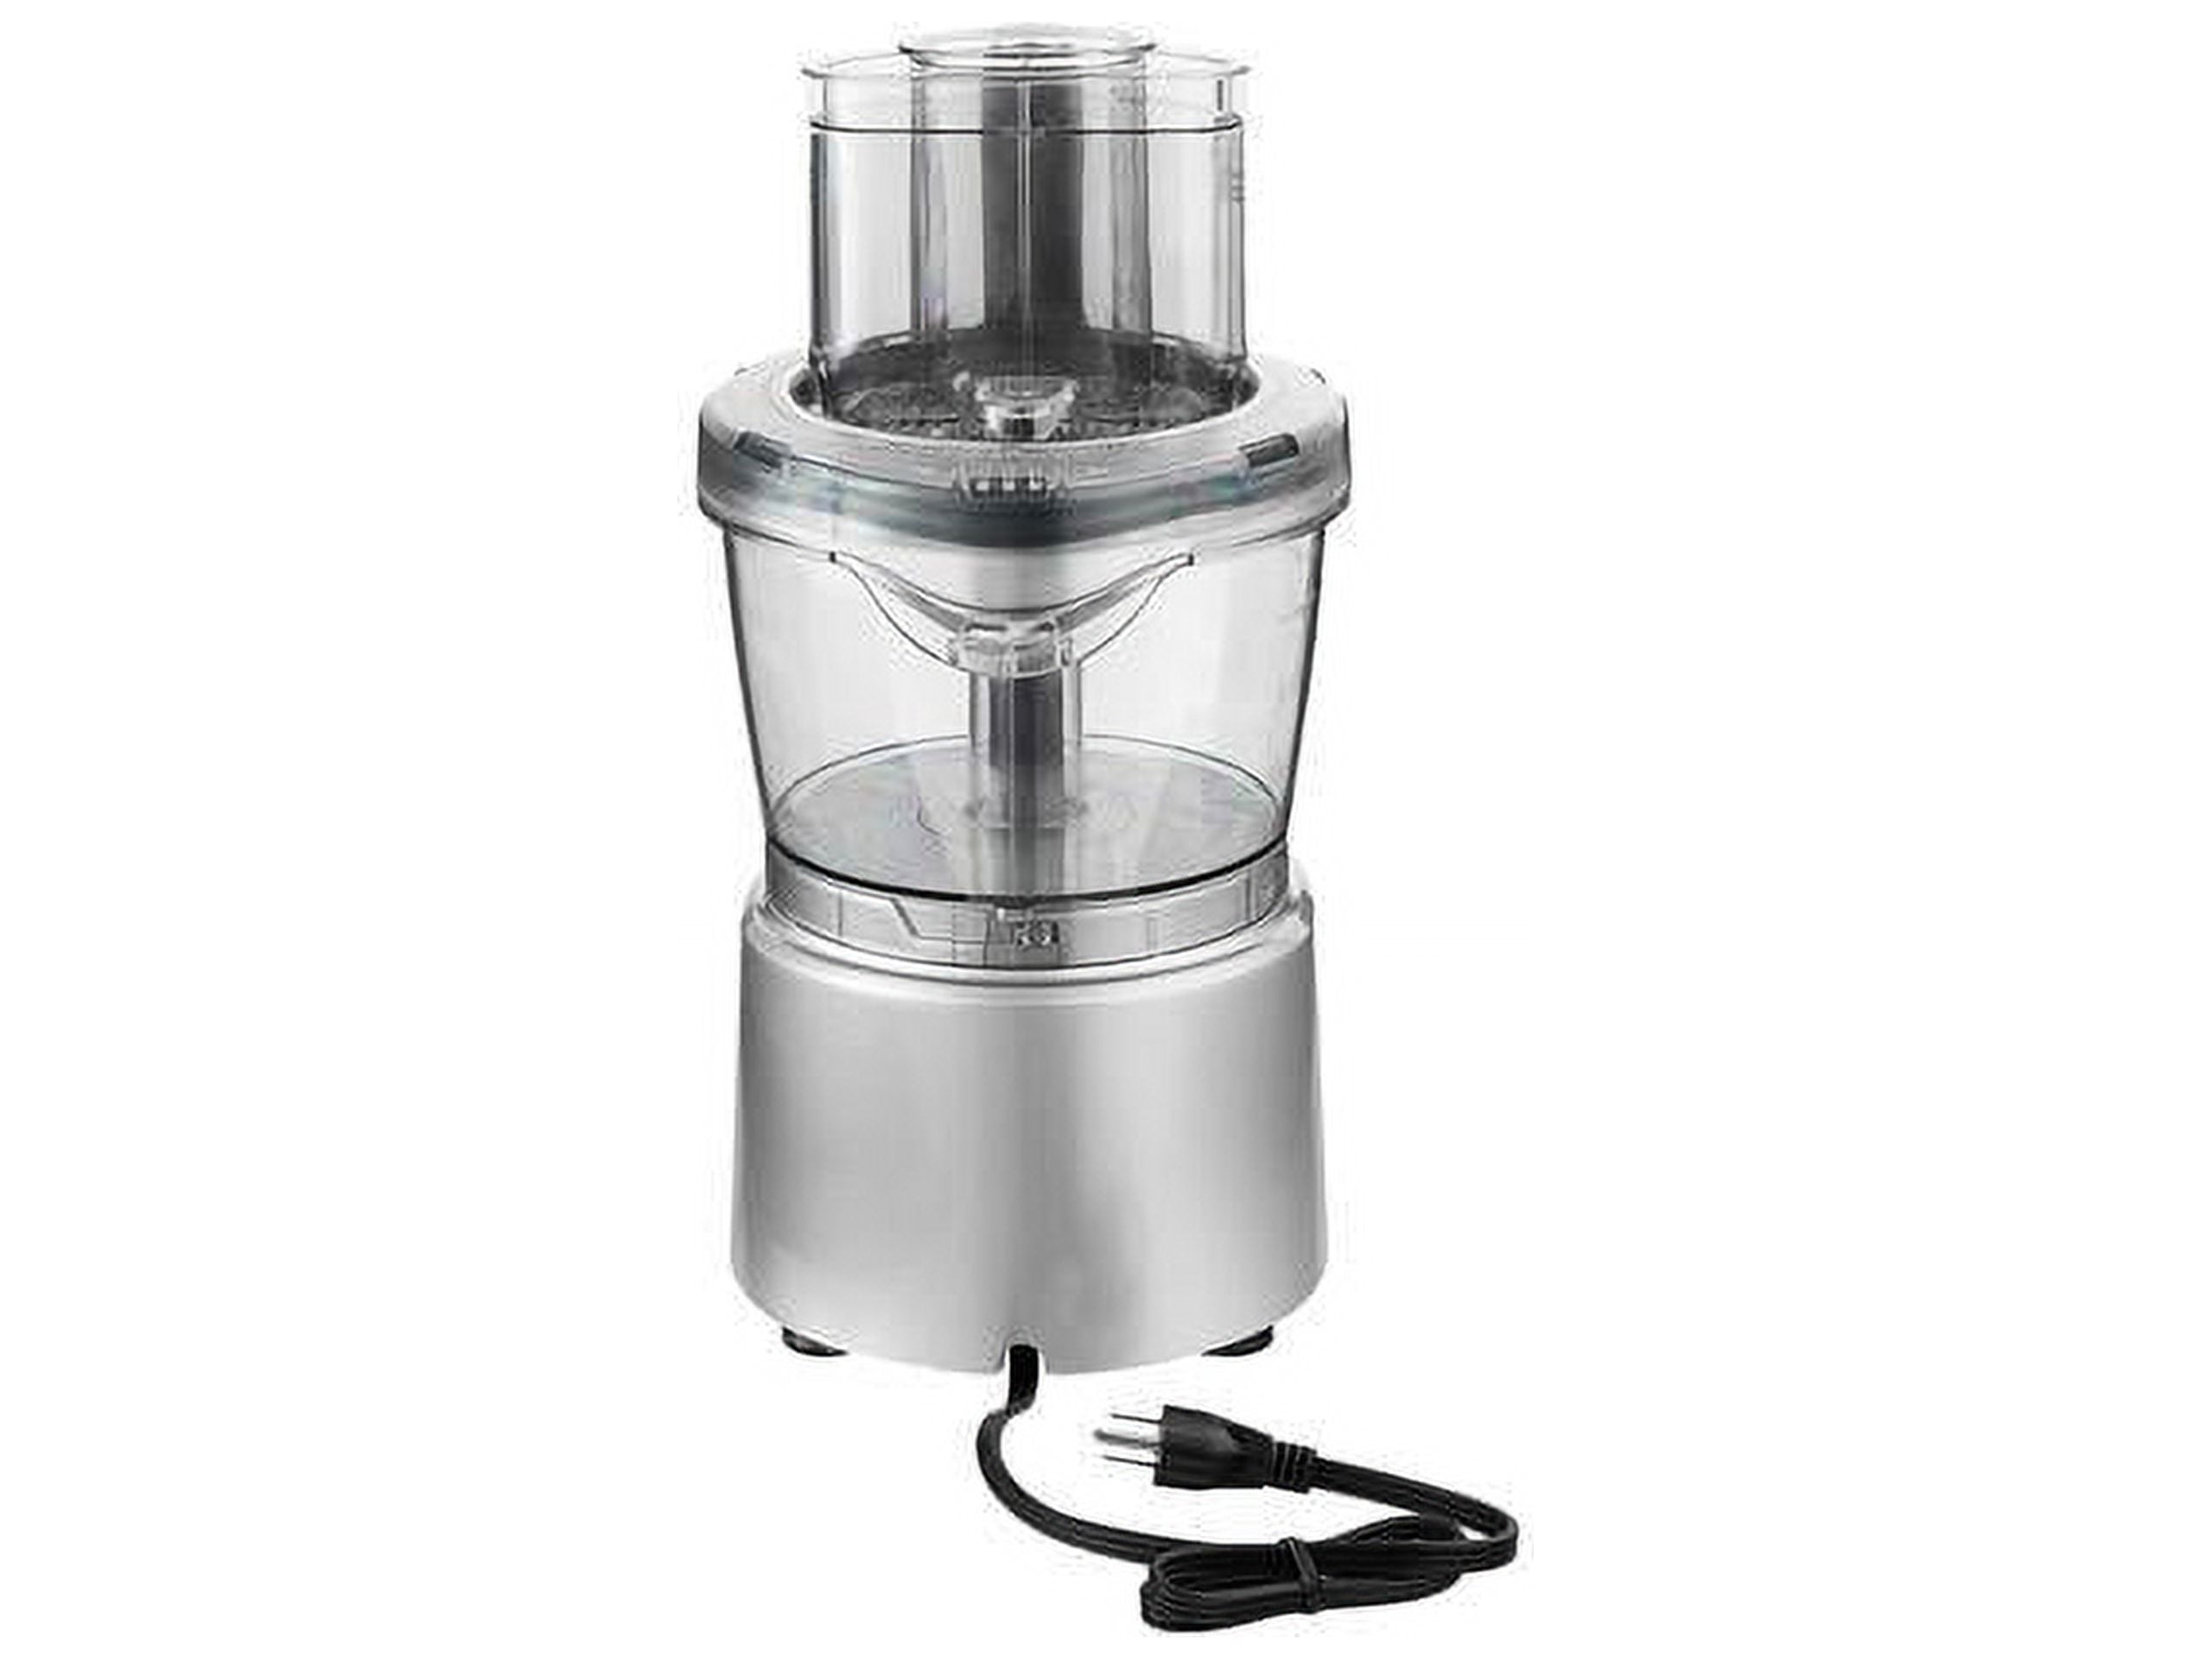 Professional Food Processor, Decen 12 Cup Food Processors with 4 Speed Function 4 in 1, 600W, Black, Size: 15.94 x 10.74 x 11.22